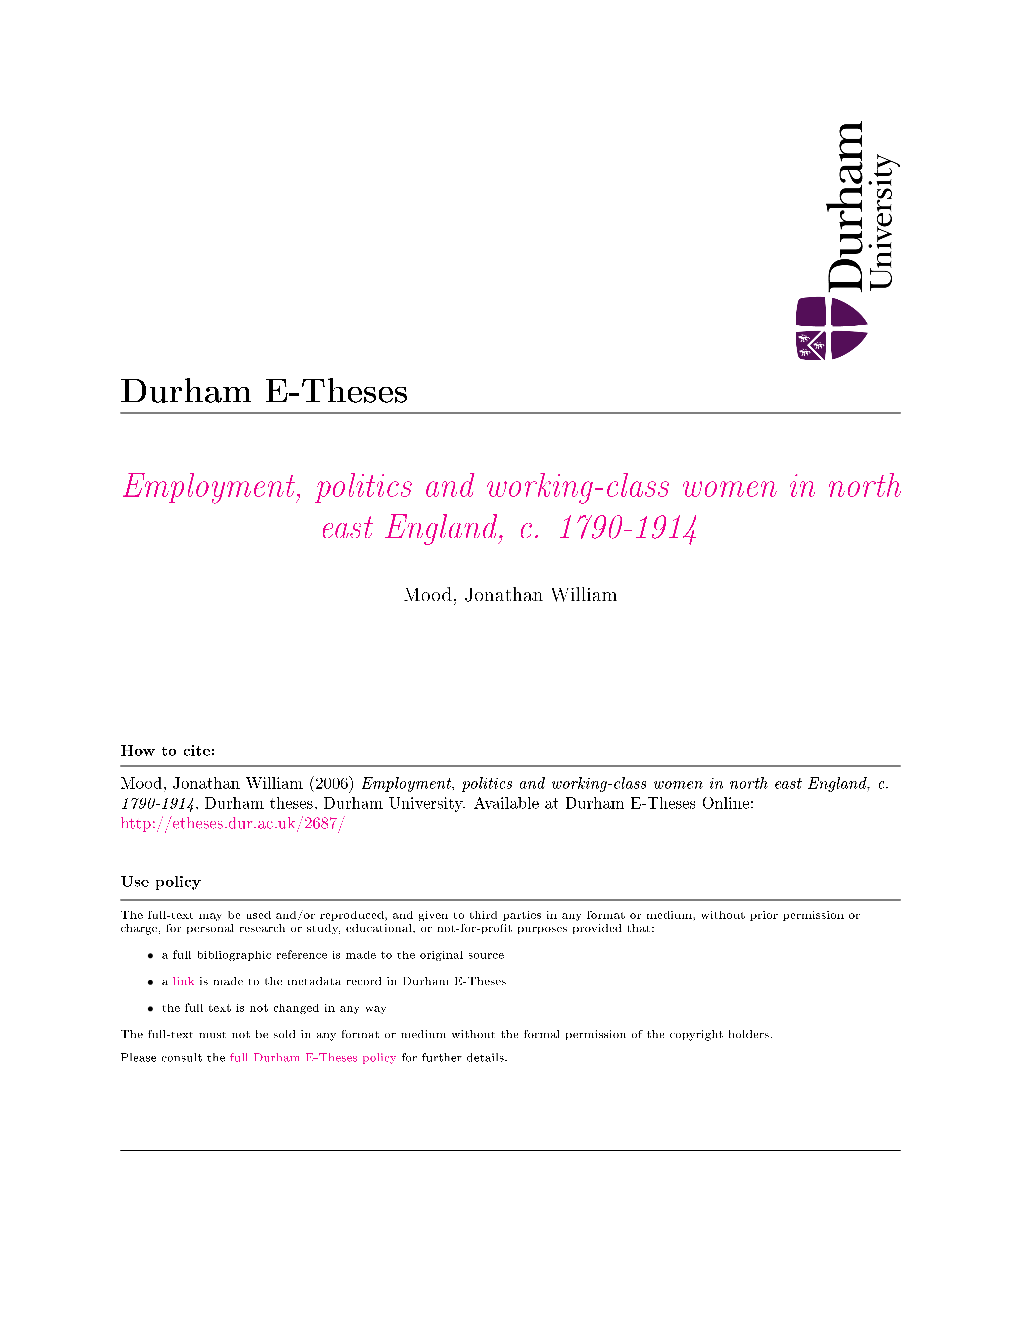 Employment, Politics and Working-Class Women in North East England, C